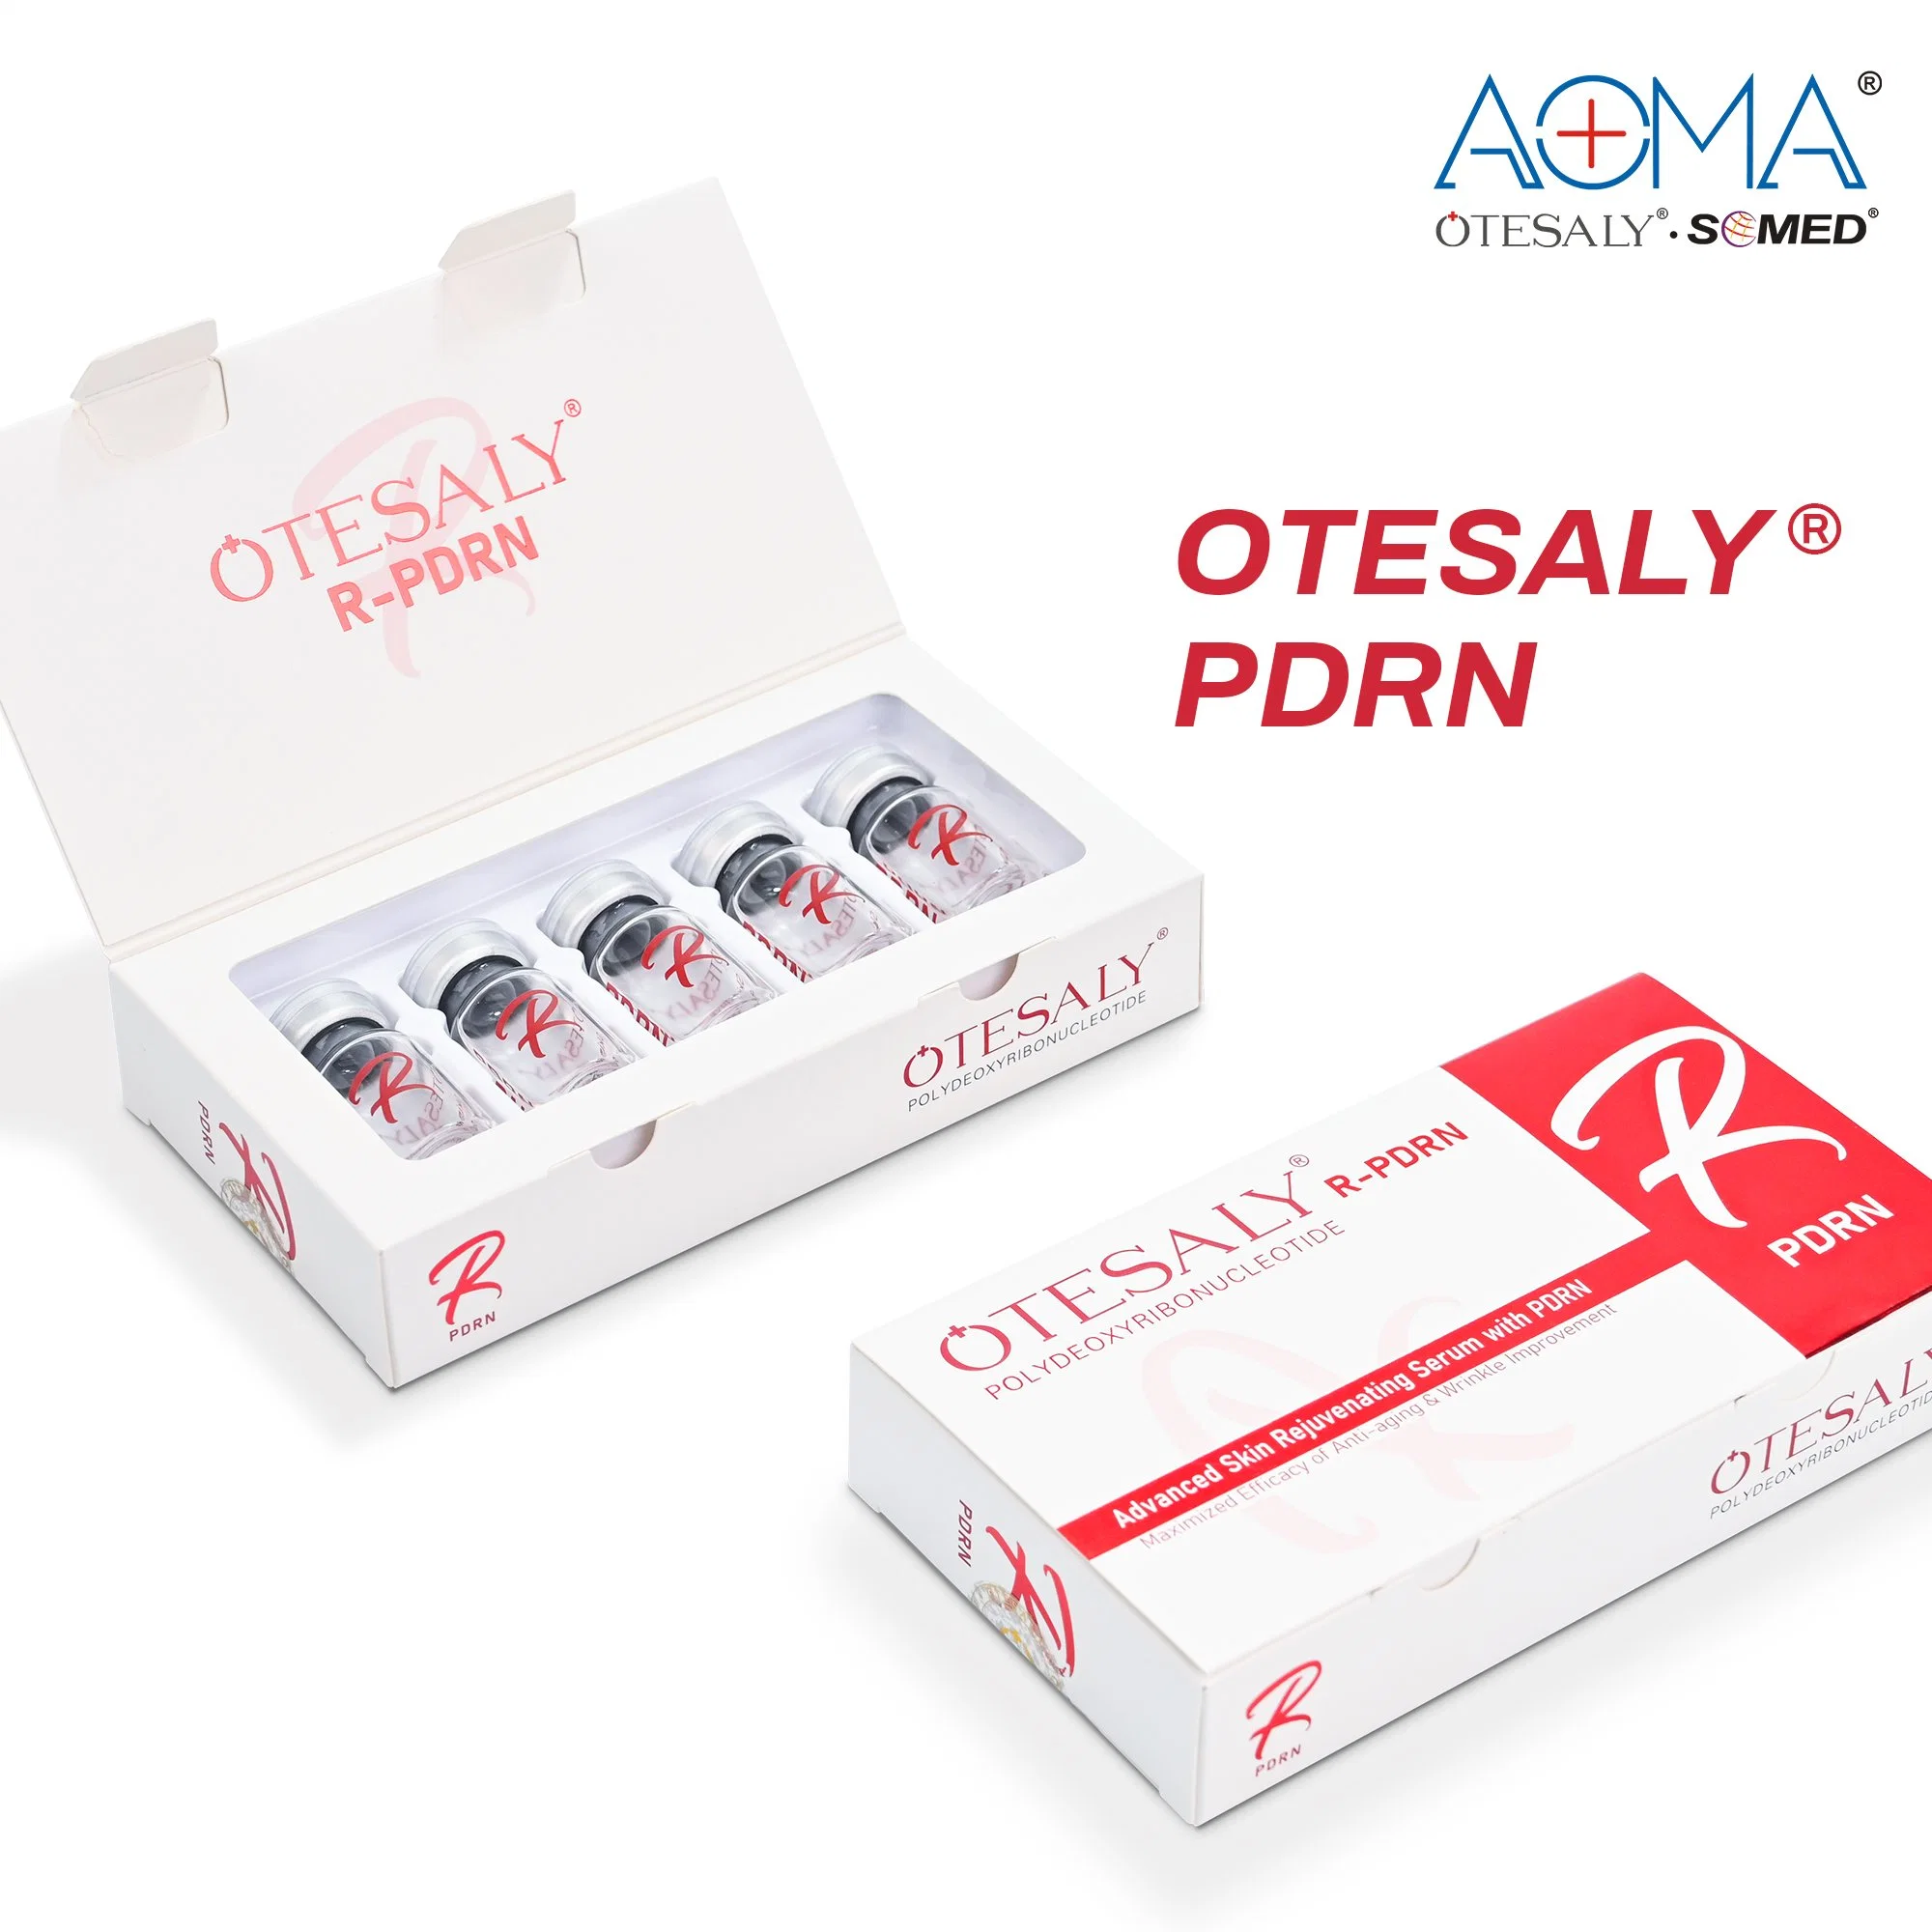 Hot Selling Otesaly Skin Rejuvenating Serum Pdrn Price Meso Pdrn Anti Aging Face Hydration Shrinking Pores Salmon Ampoules Mesotherapy Injection